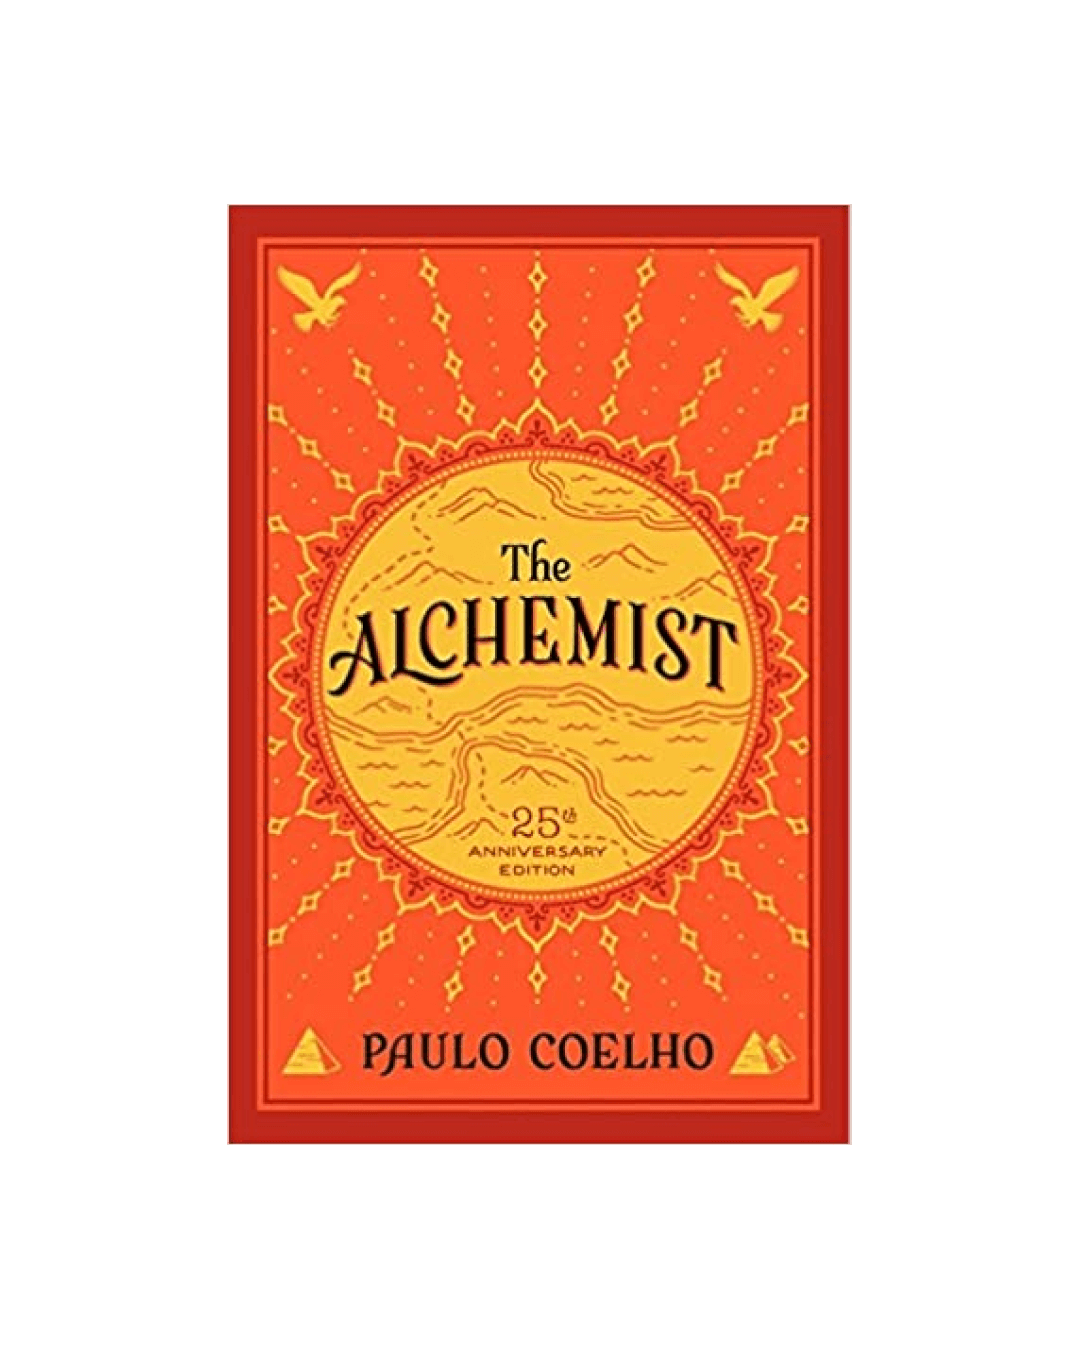 The Alchemist book cover